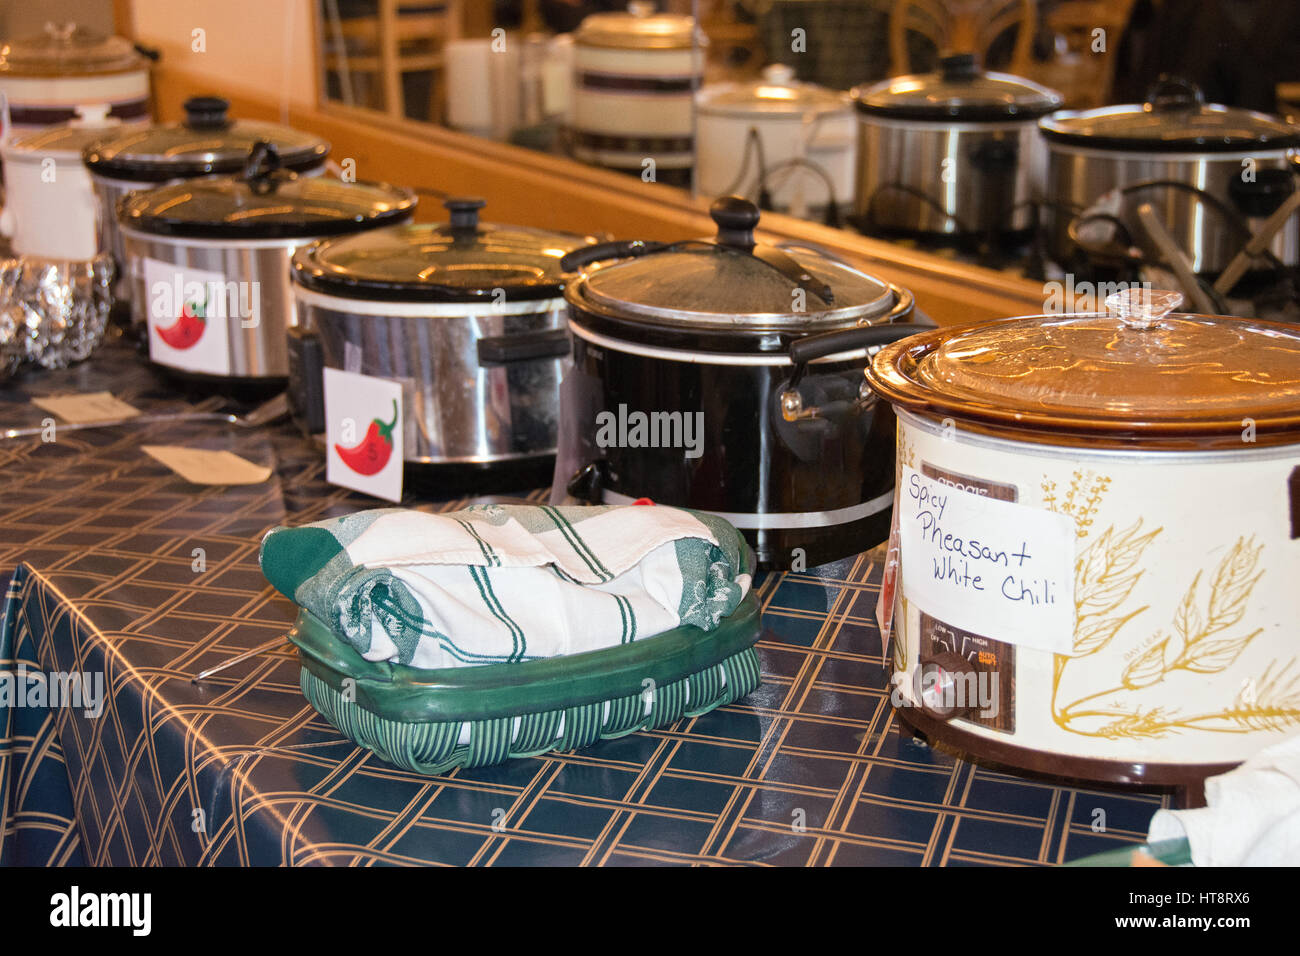 row of crock pots in chili cook-off contest Stock Photo